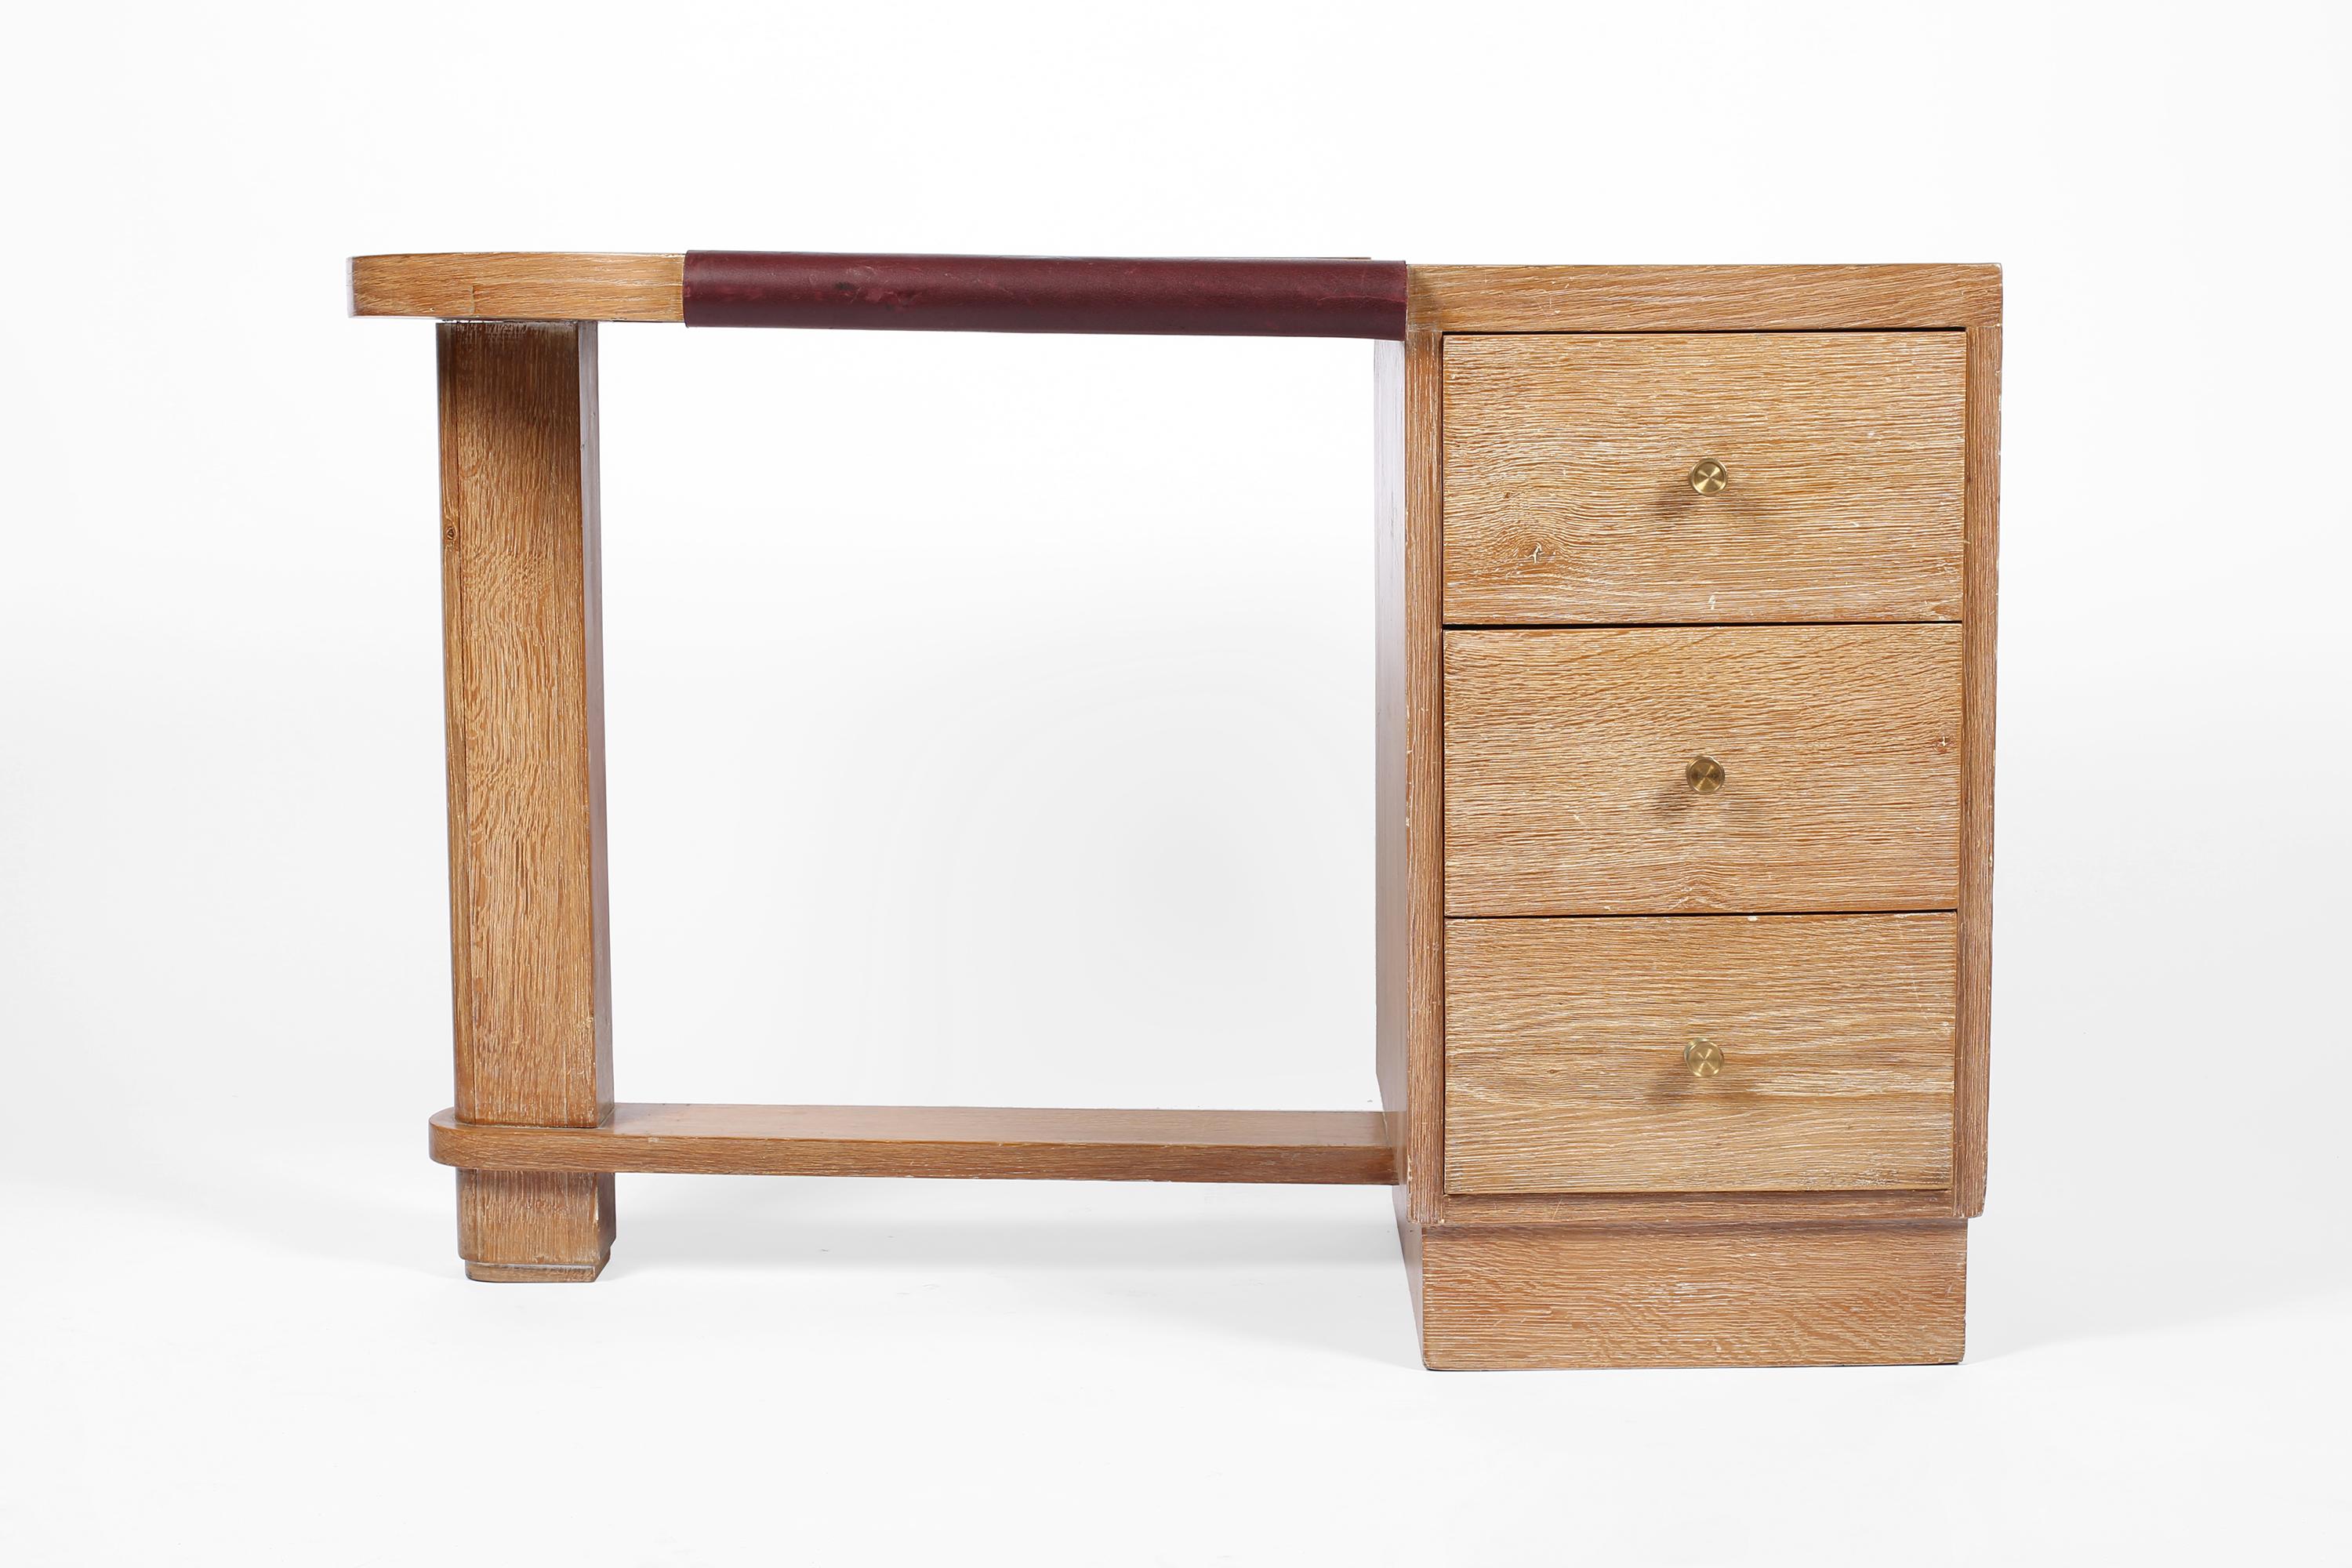 1930s French Art Deco Limed Oak and Leather Desk in the manner of Jacques Adnet In Good Condition For Sale In London, GB